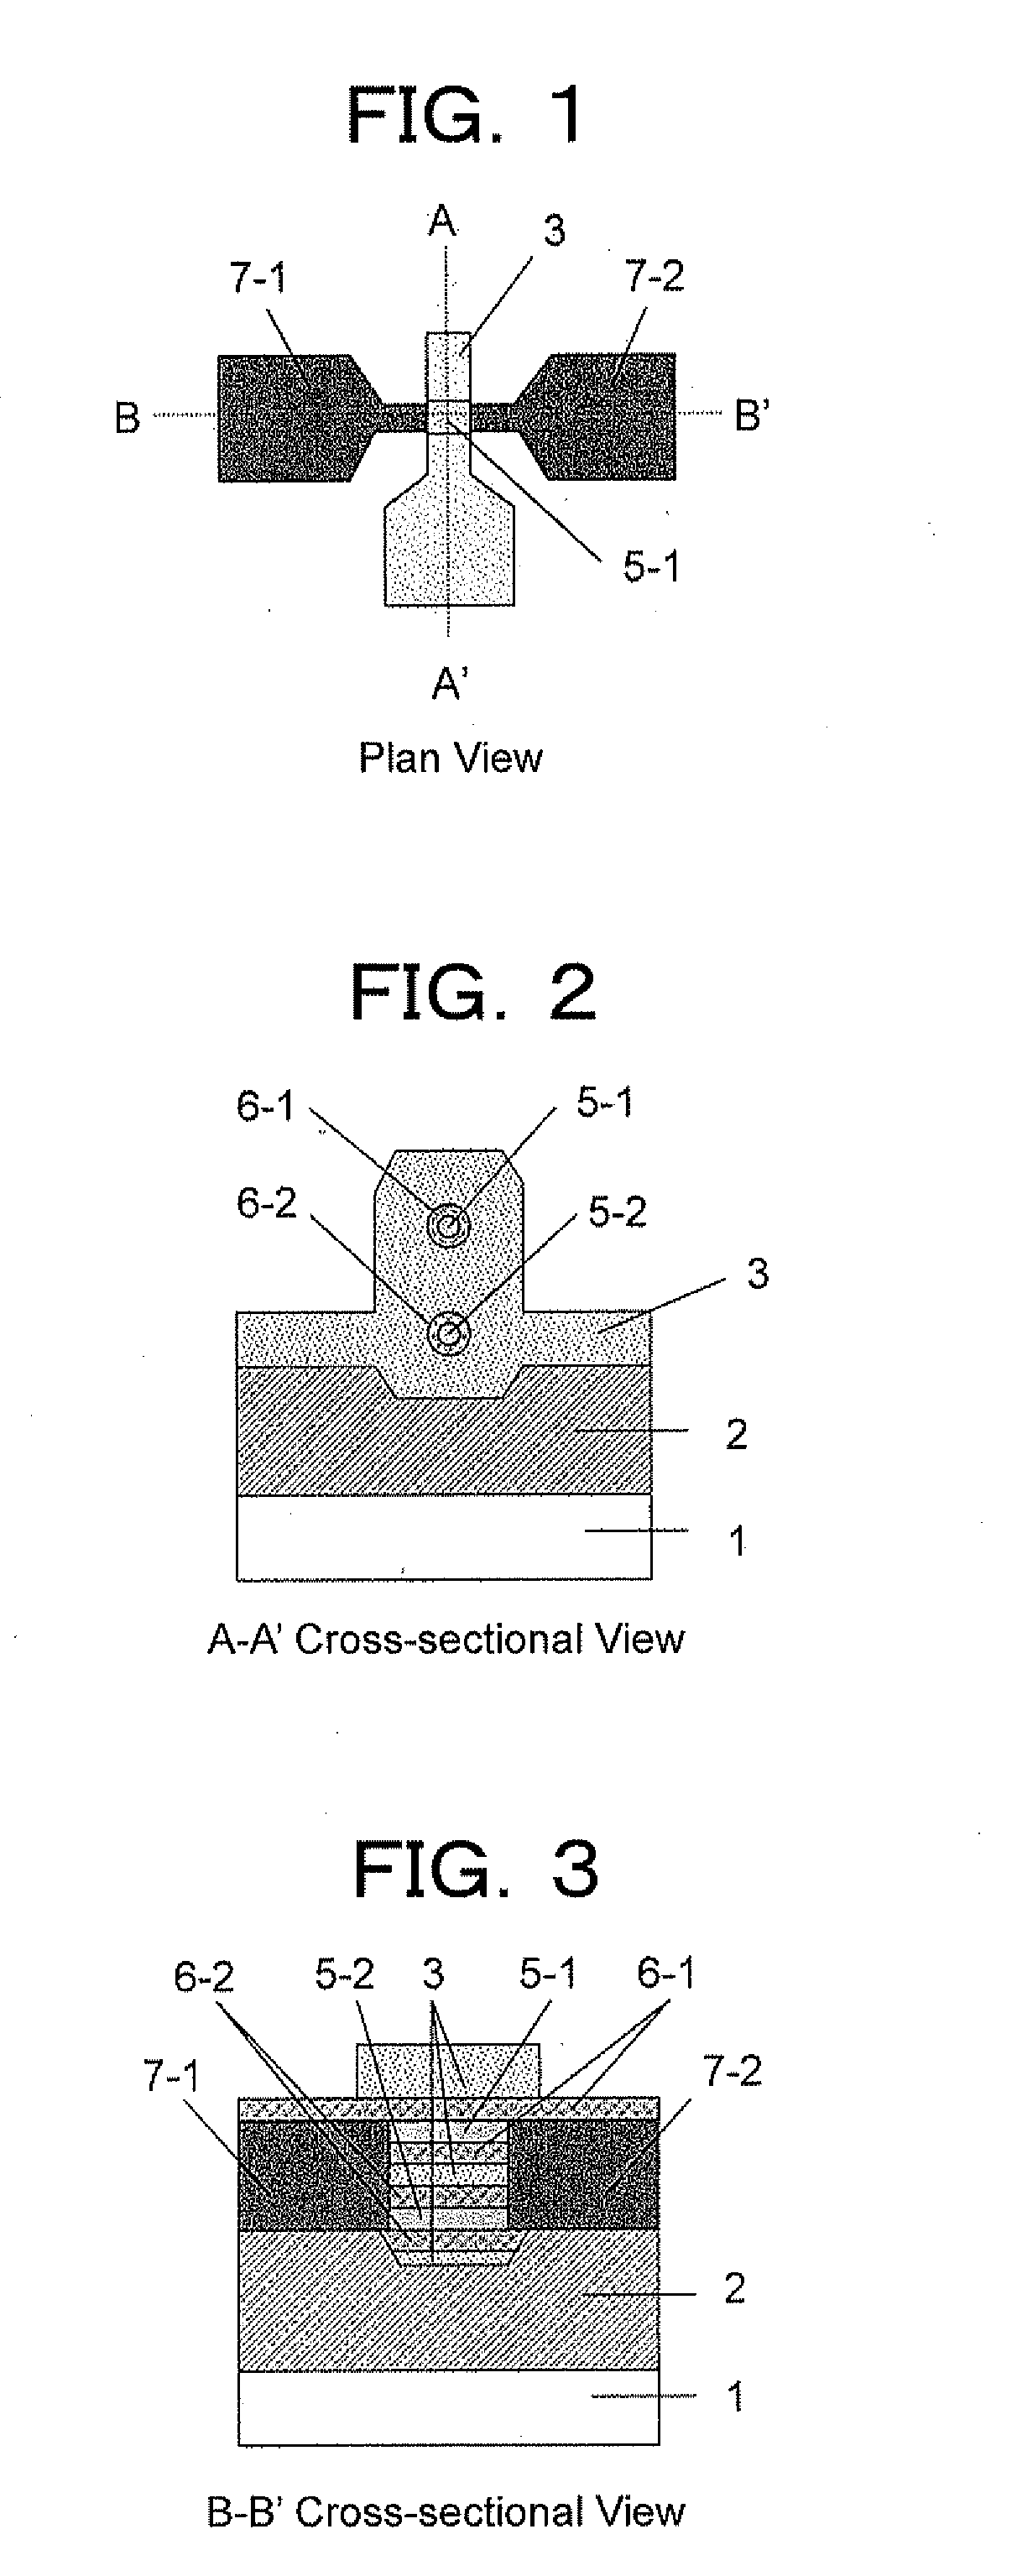 Nano-wire field effect transistor, method for manufacturing the transistor, and integrated circuit including the transistor